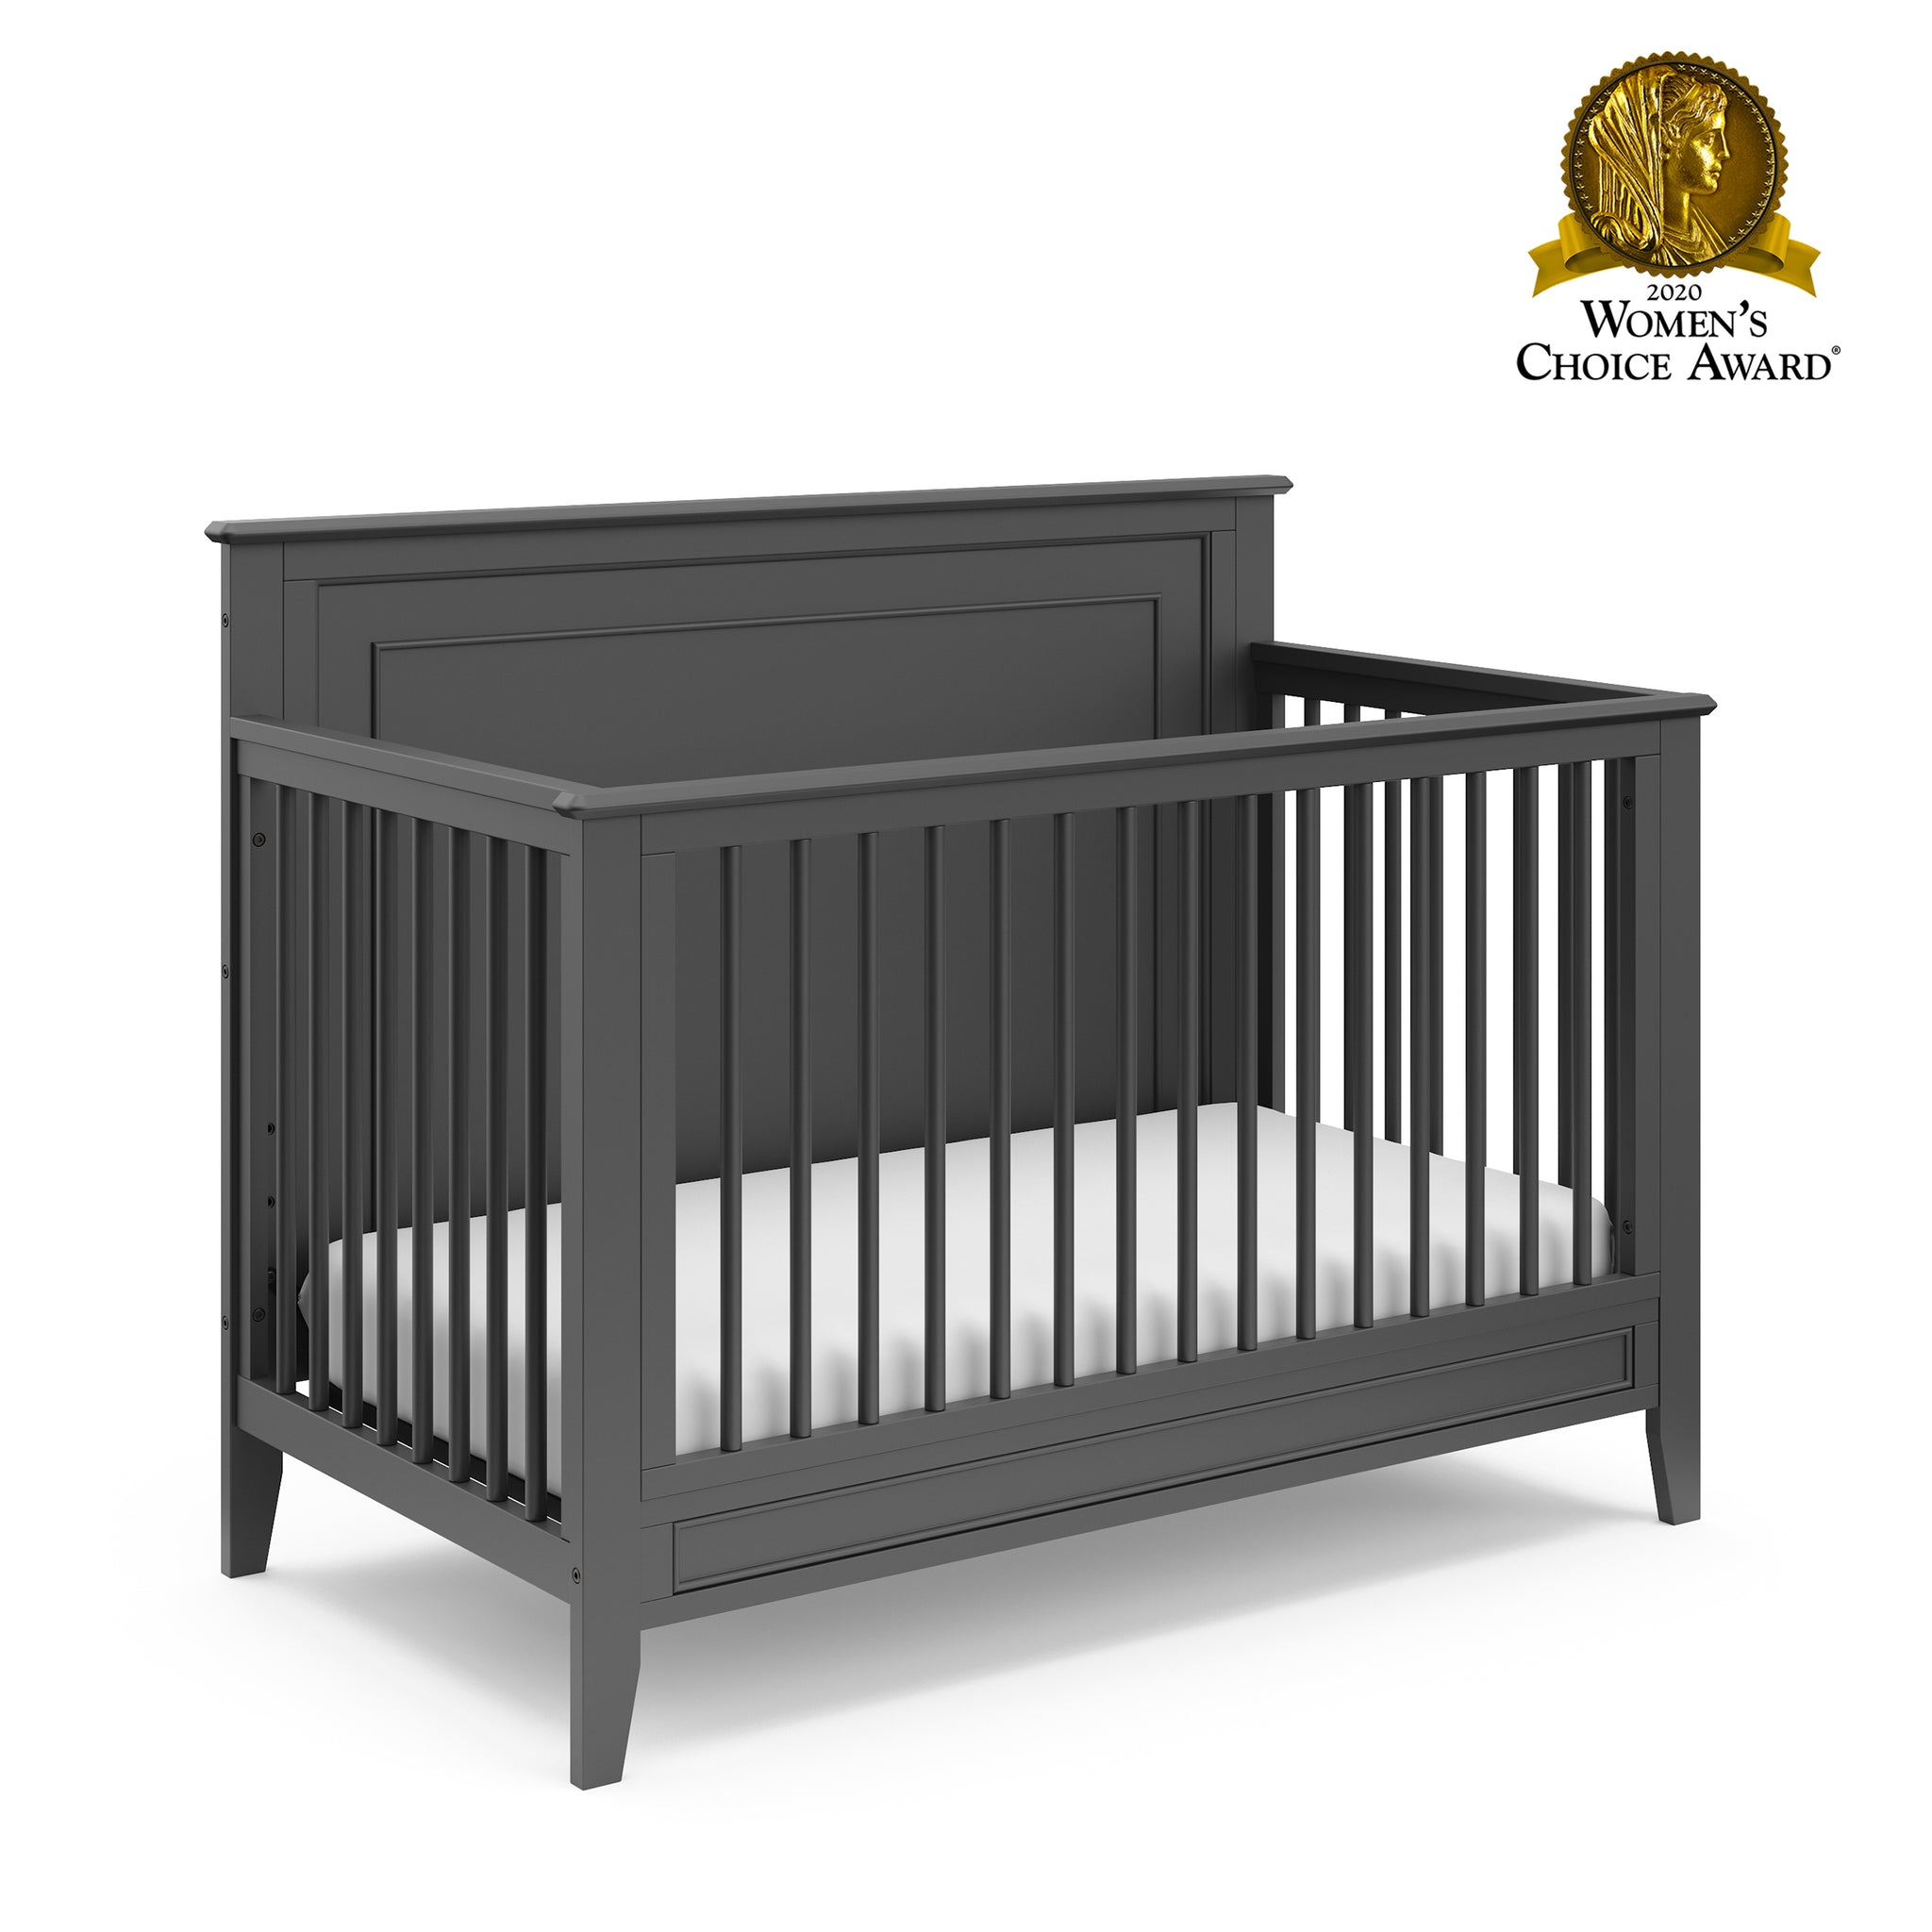 Front view of pebble gray crib graphic 